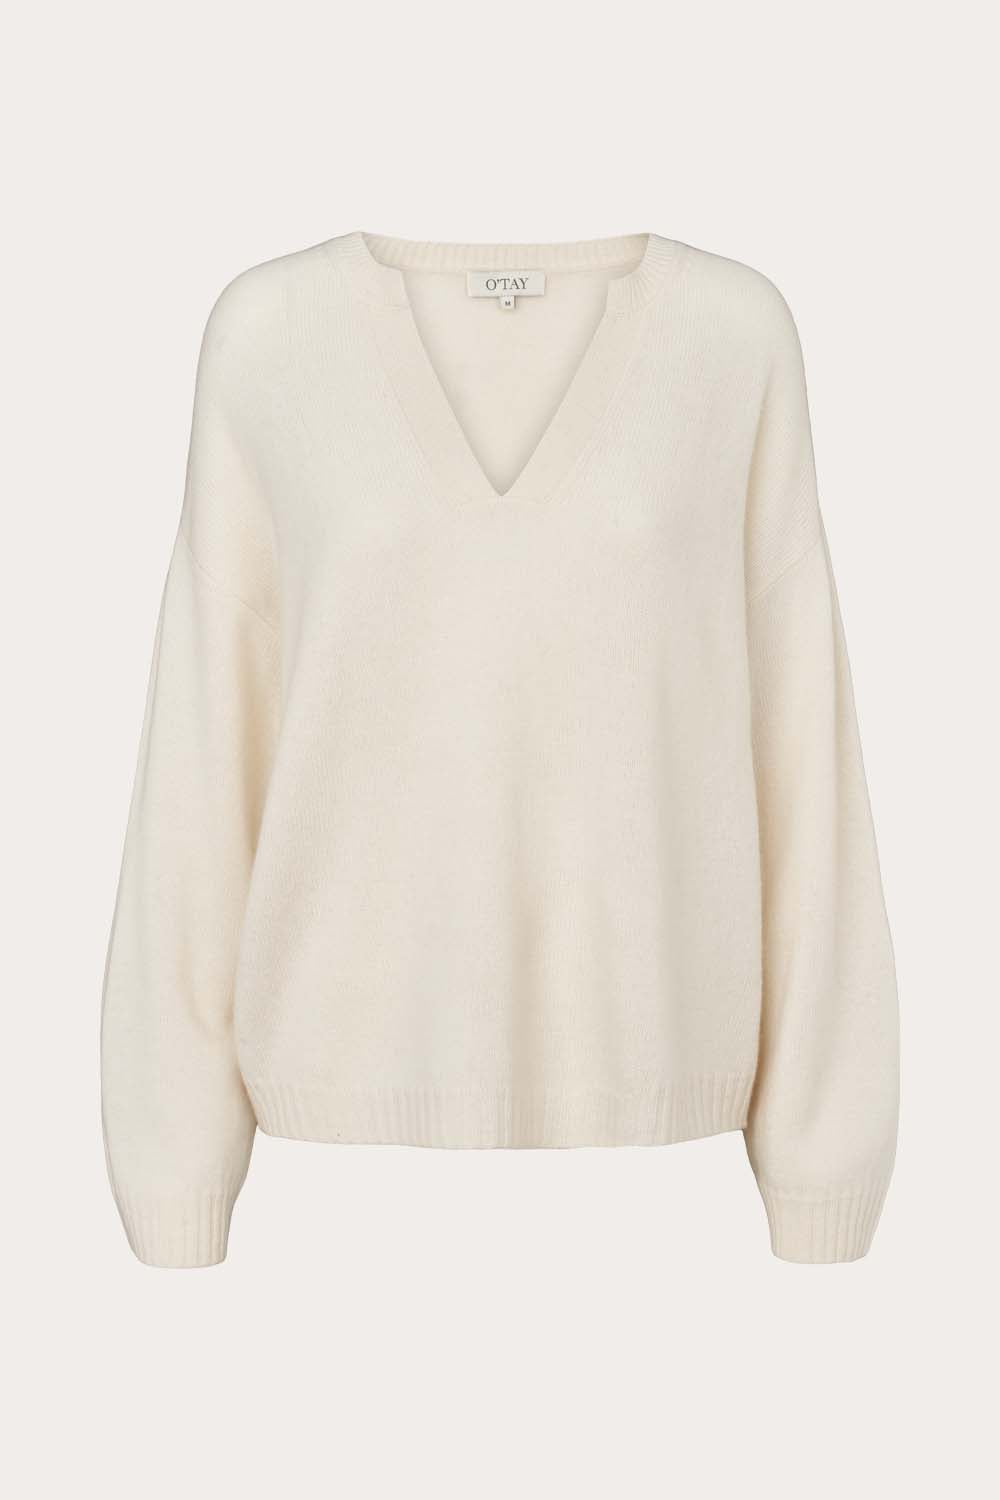 O'TAY Donna Sweater Bluser Off White